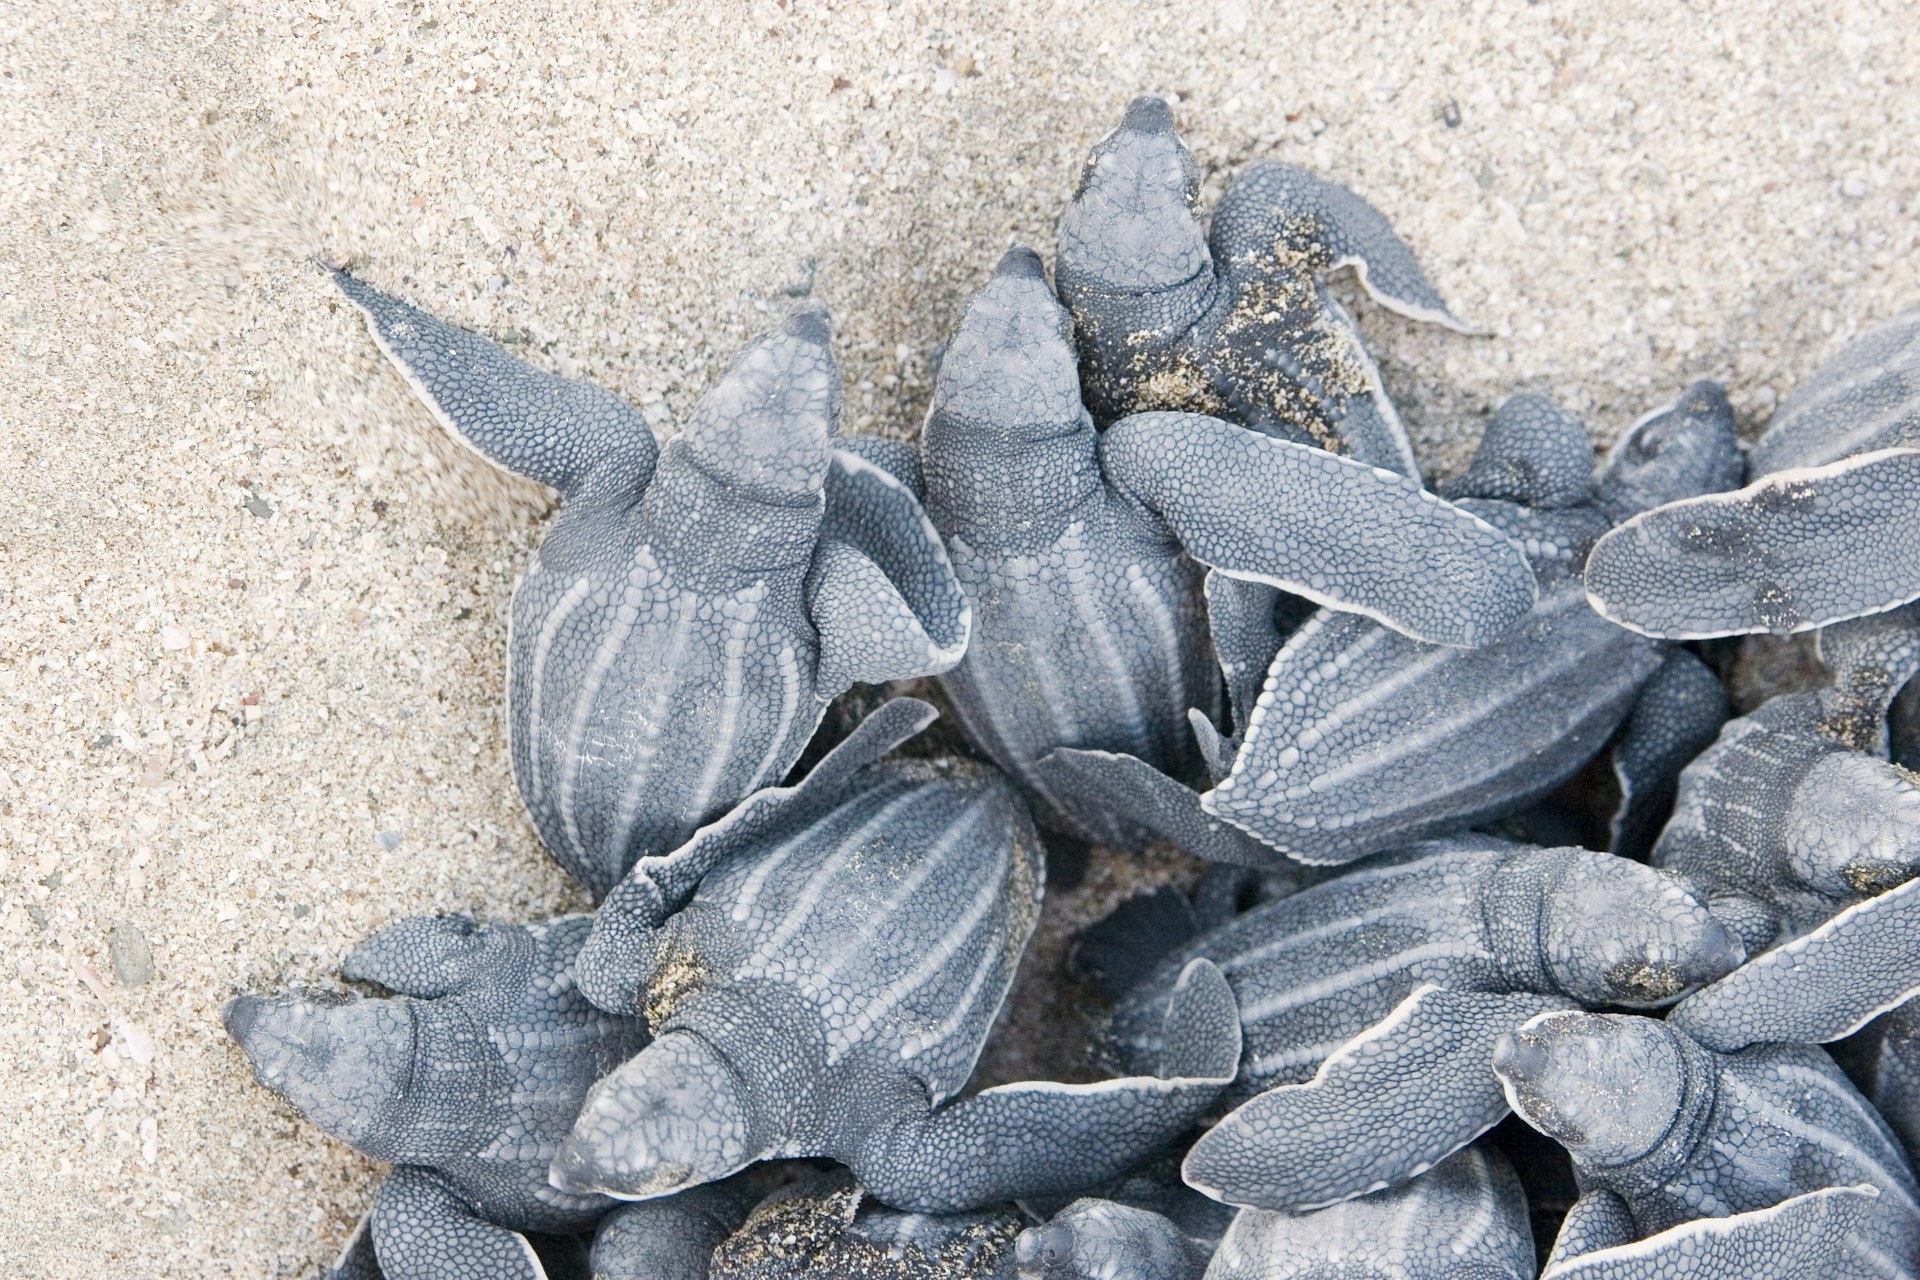 A cluster of endangered leatherback sea turtle hatchlings emerging from their nest on a beach in Costa Rica